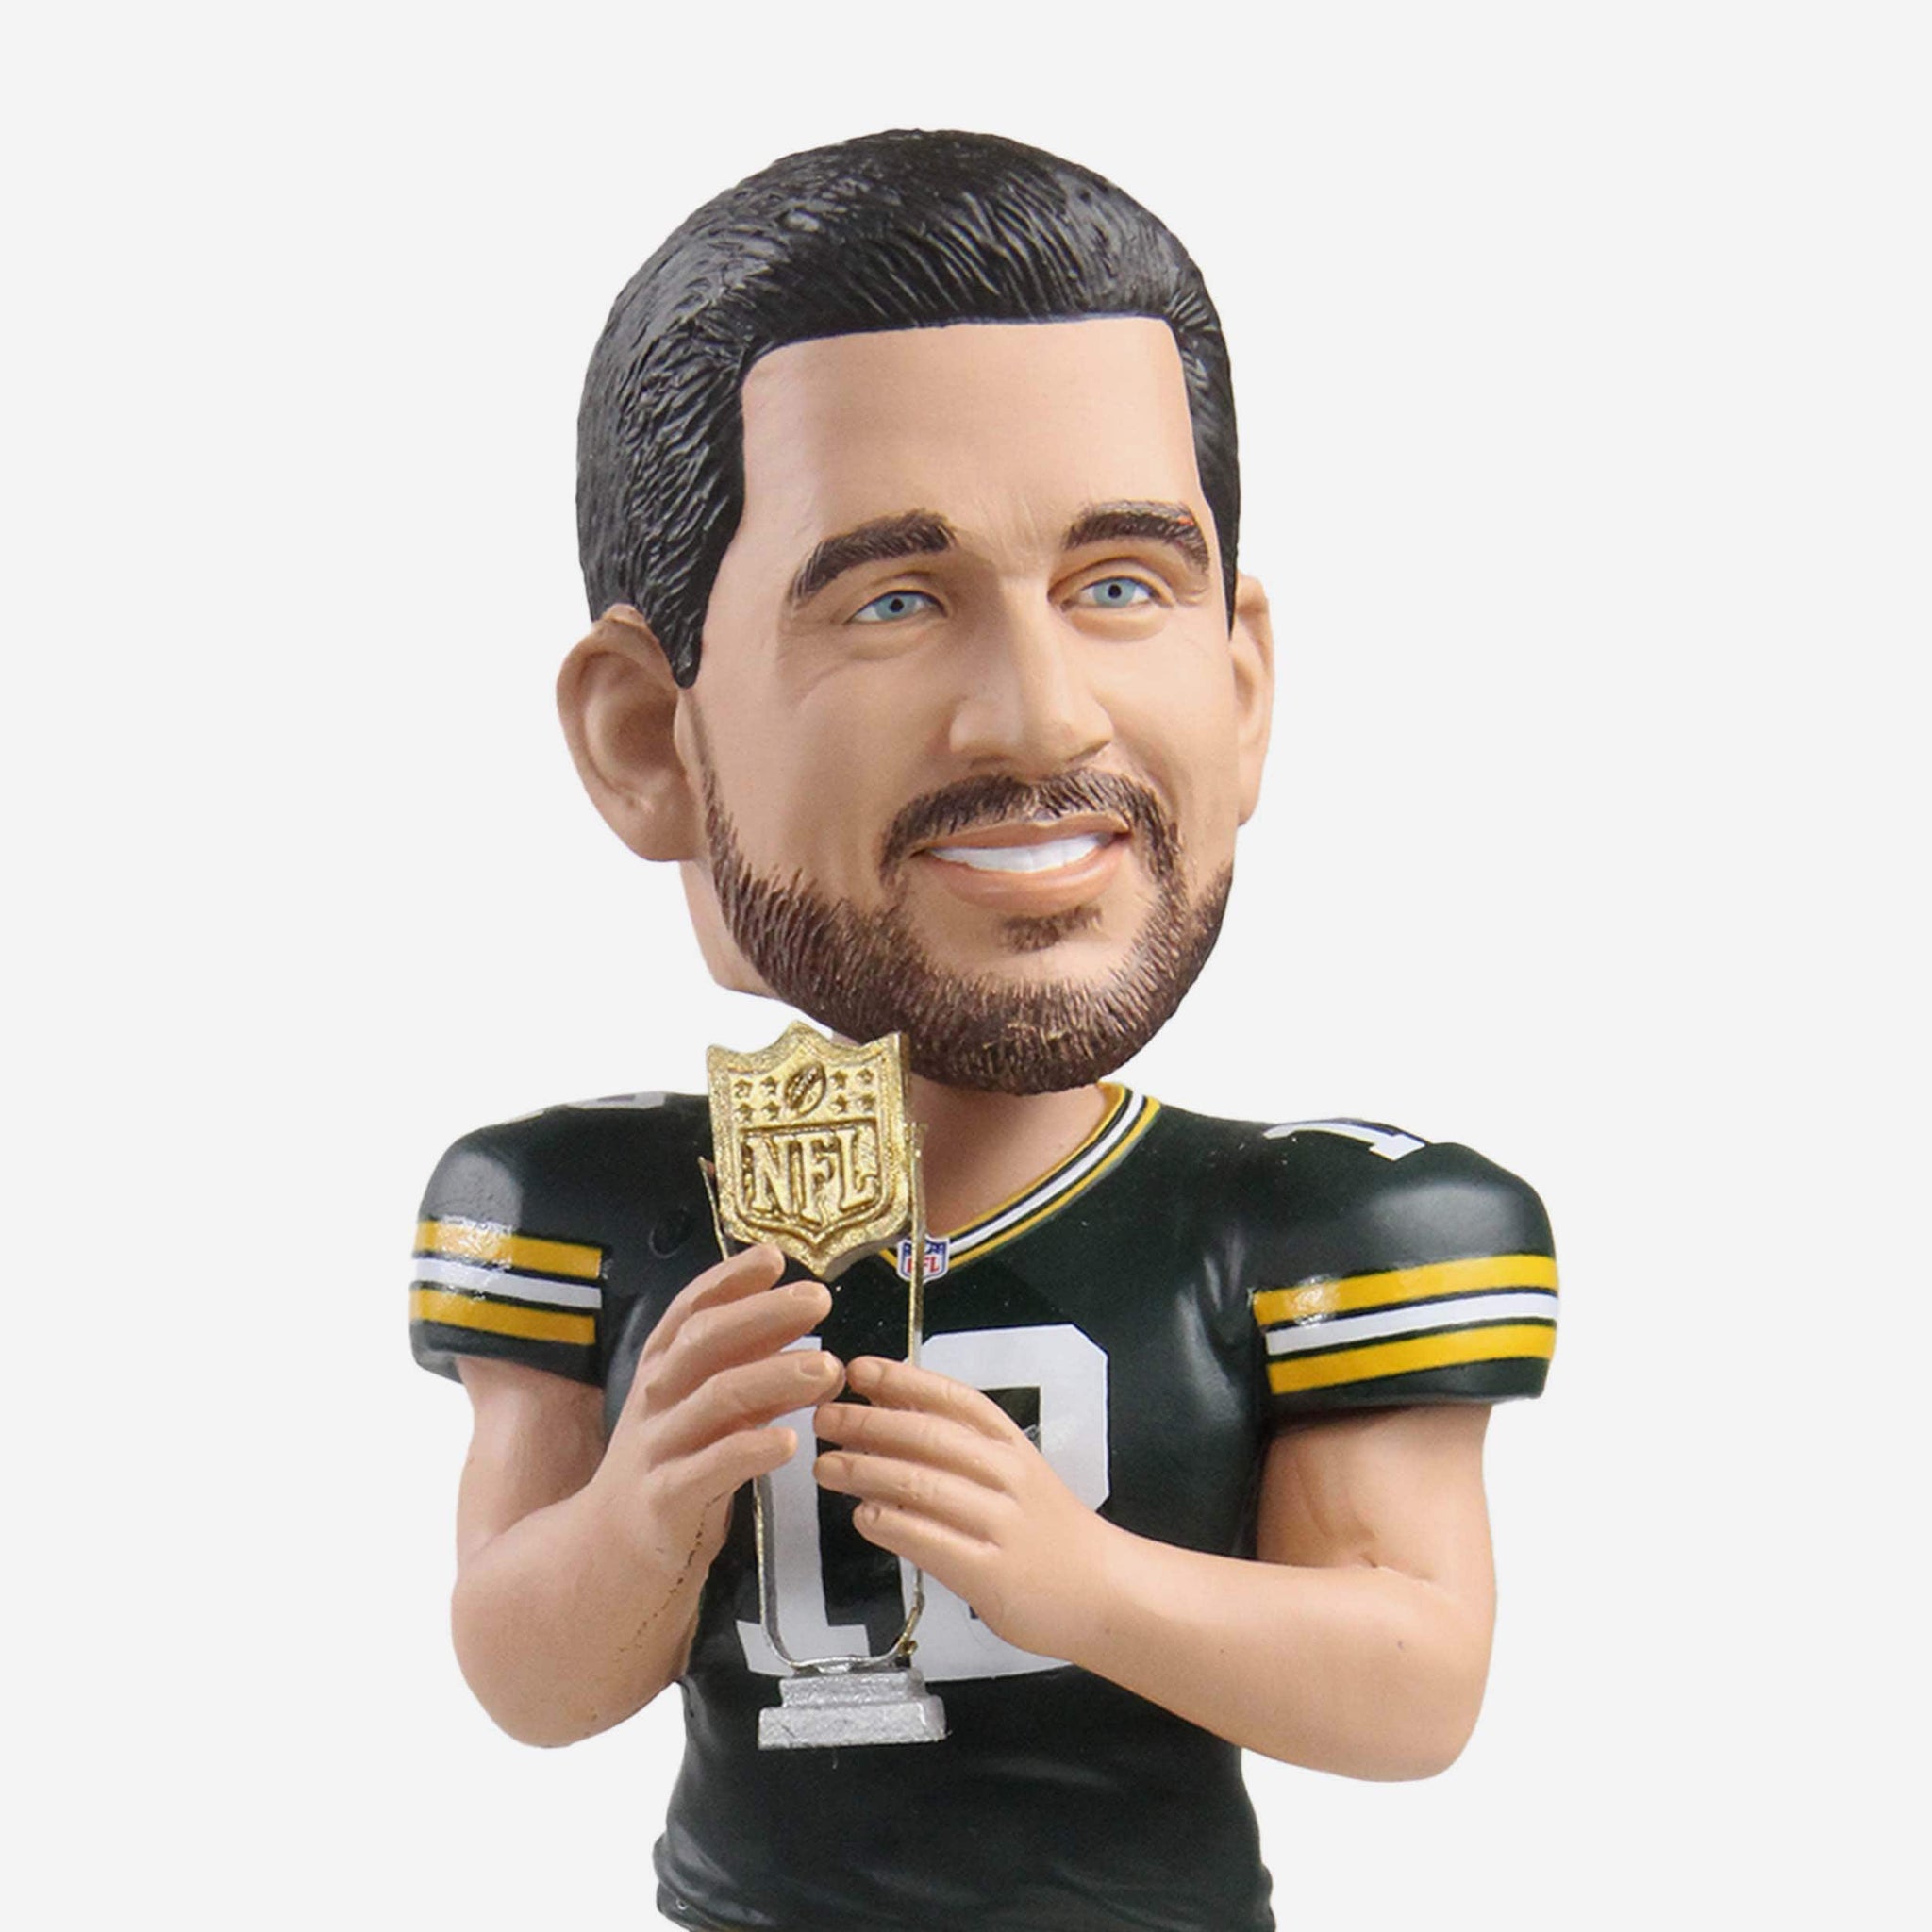 Green Bay Packers Framed Jersey Bobbleheads - Featuring Aaron